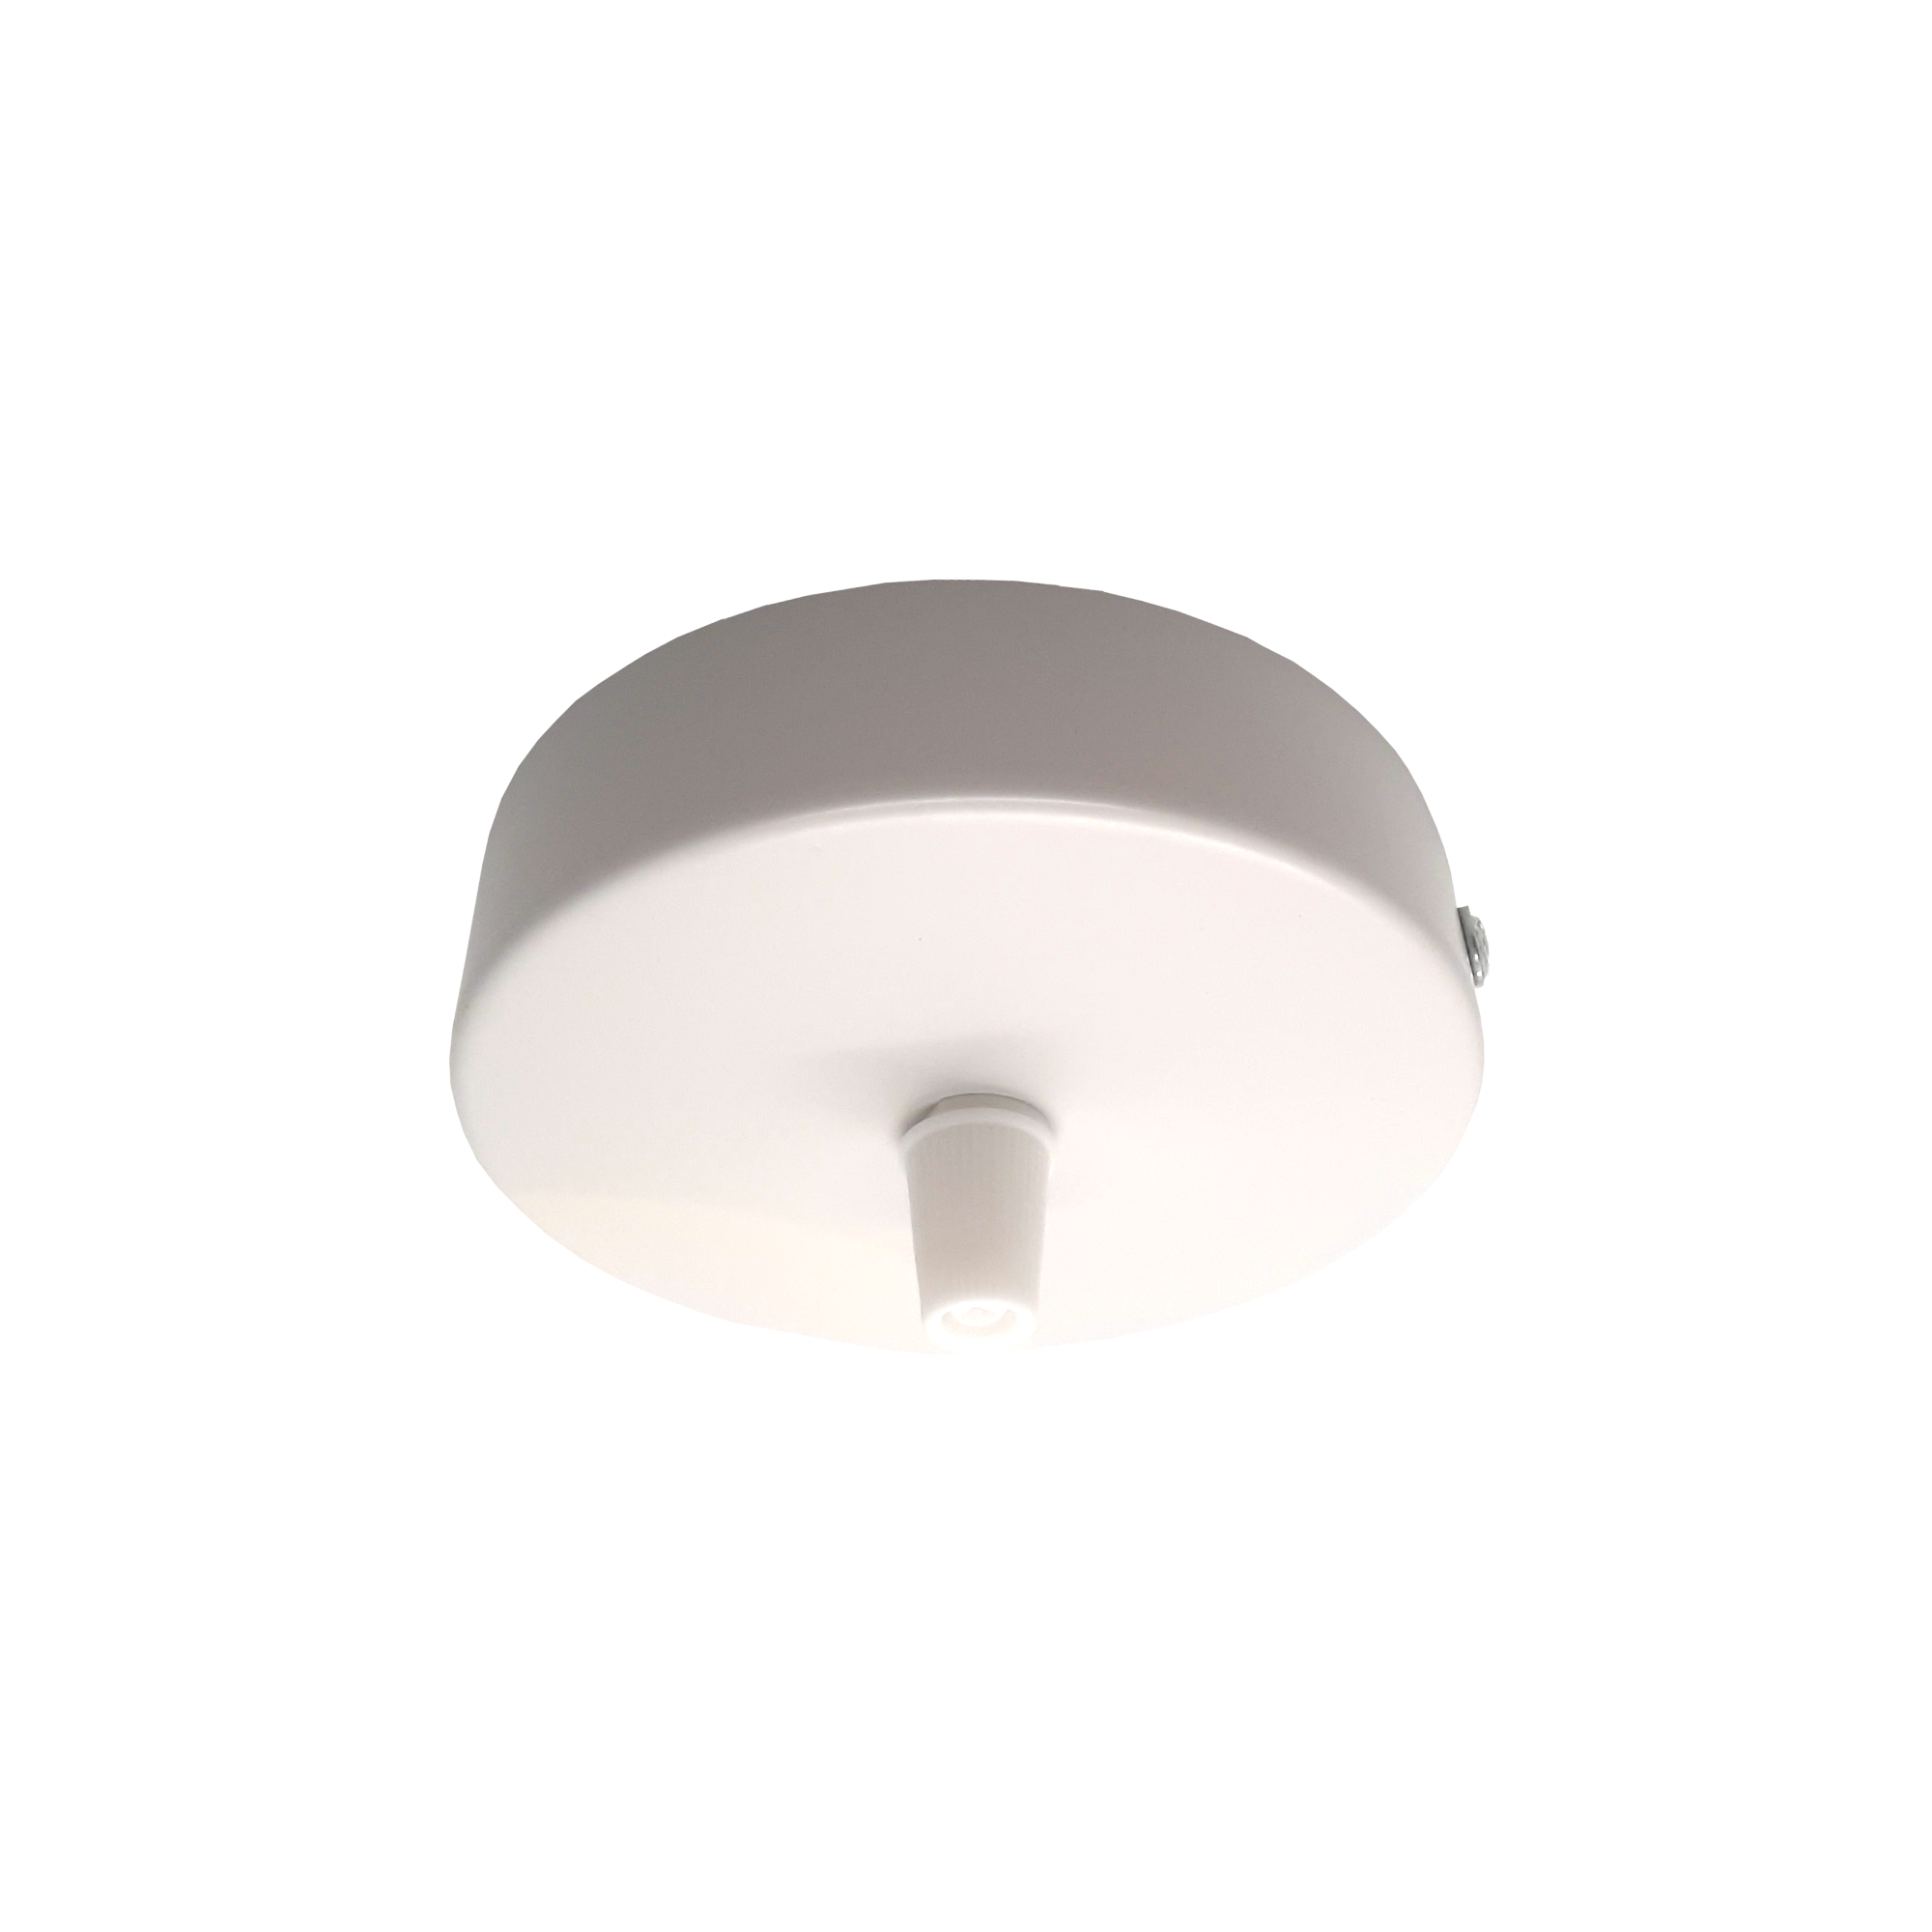 Product image of SCR064 Ceiling Rose 100mm White